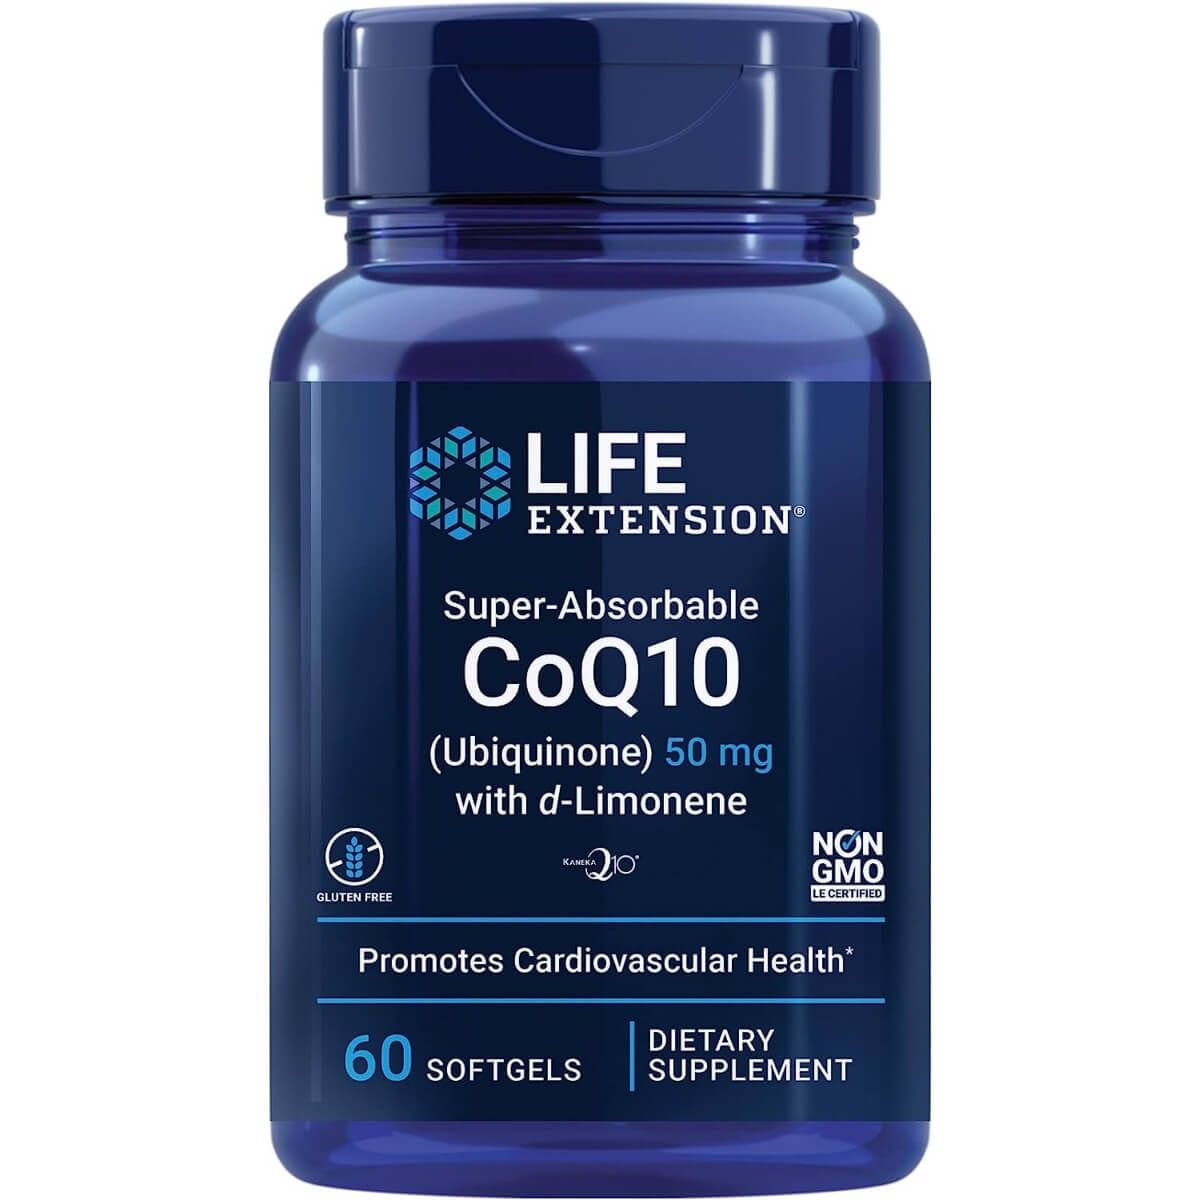 Photos - Vitamins & Minerals Life Extension Super-Absorbable CoQ10  with d-Limonene 50 mg 6 (Ubiquinone)